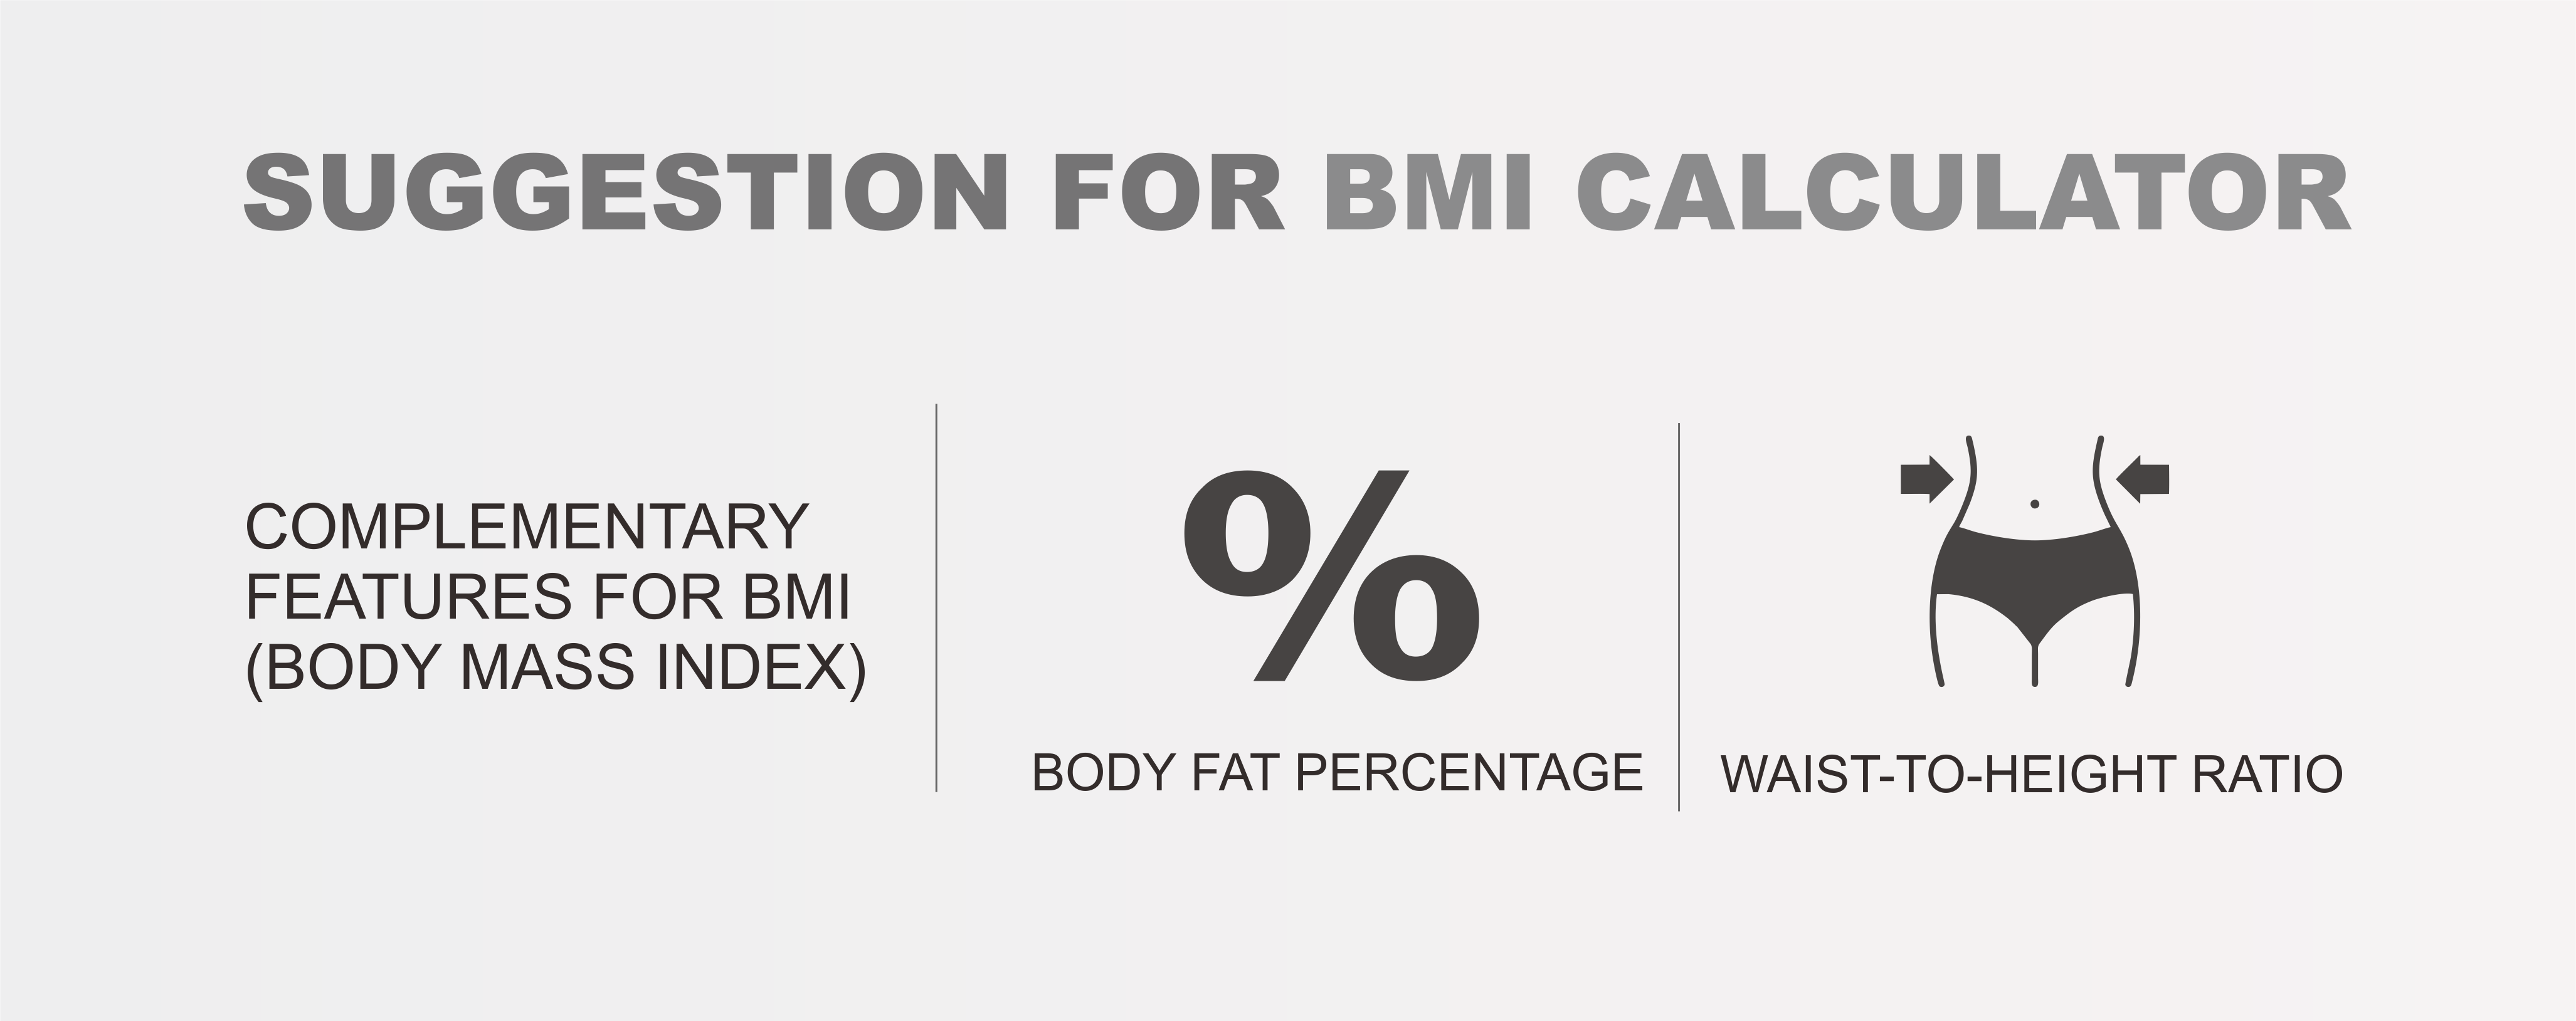 Suggestion For BMI Calculator : Add Complementary Features in BMI, BTP  (Body Fat Percentage), and WtHR (Waist-to-Height Ratio) · Issue #8 ·  zikalify/BMI_Calculator · GitHub